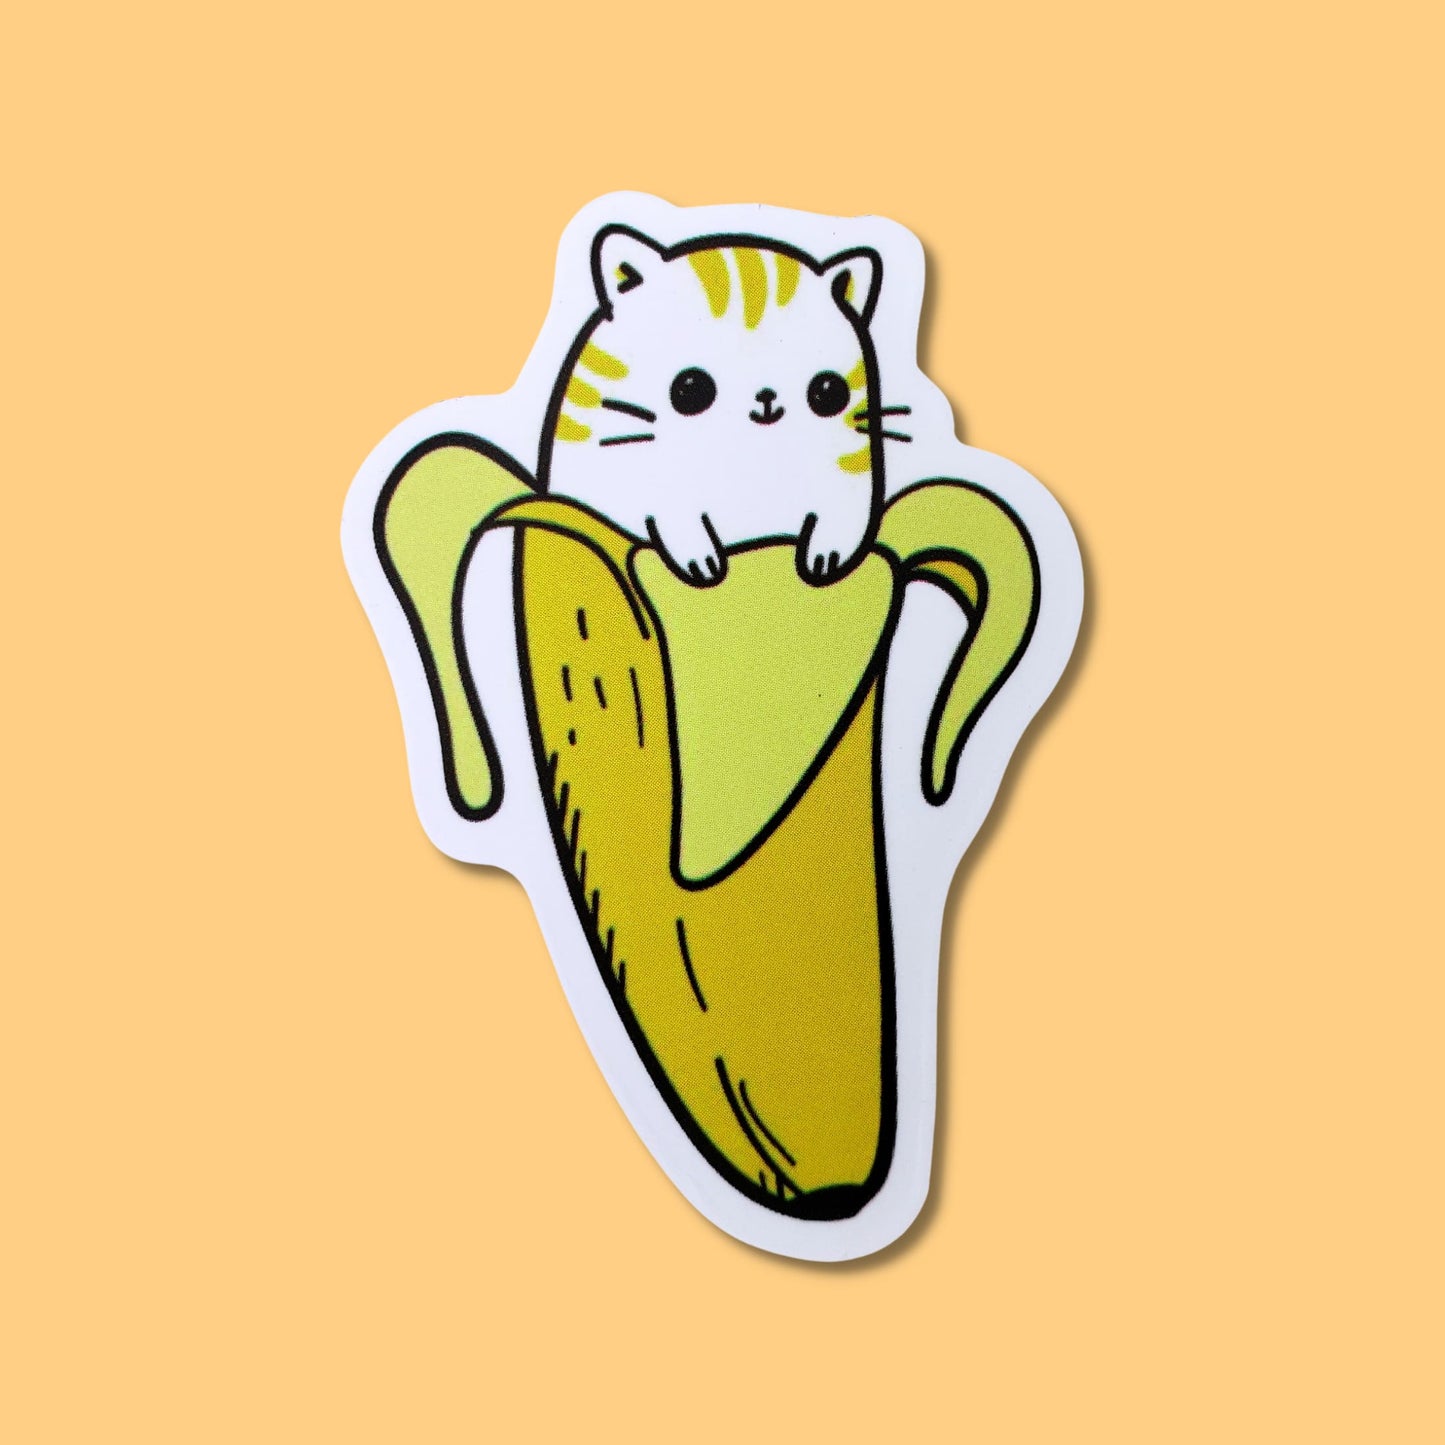 Cat in Banana Waterproof Sticker | Ba Na Na Cat from Confetti Kitty, Only 1.00